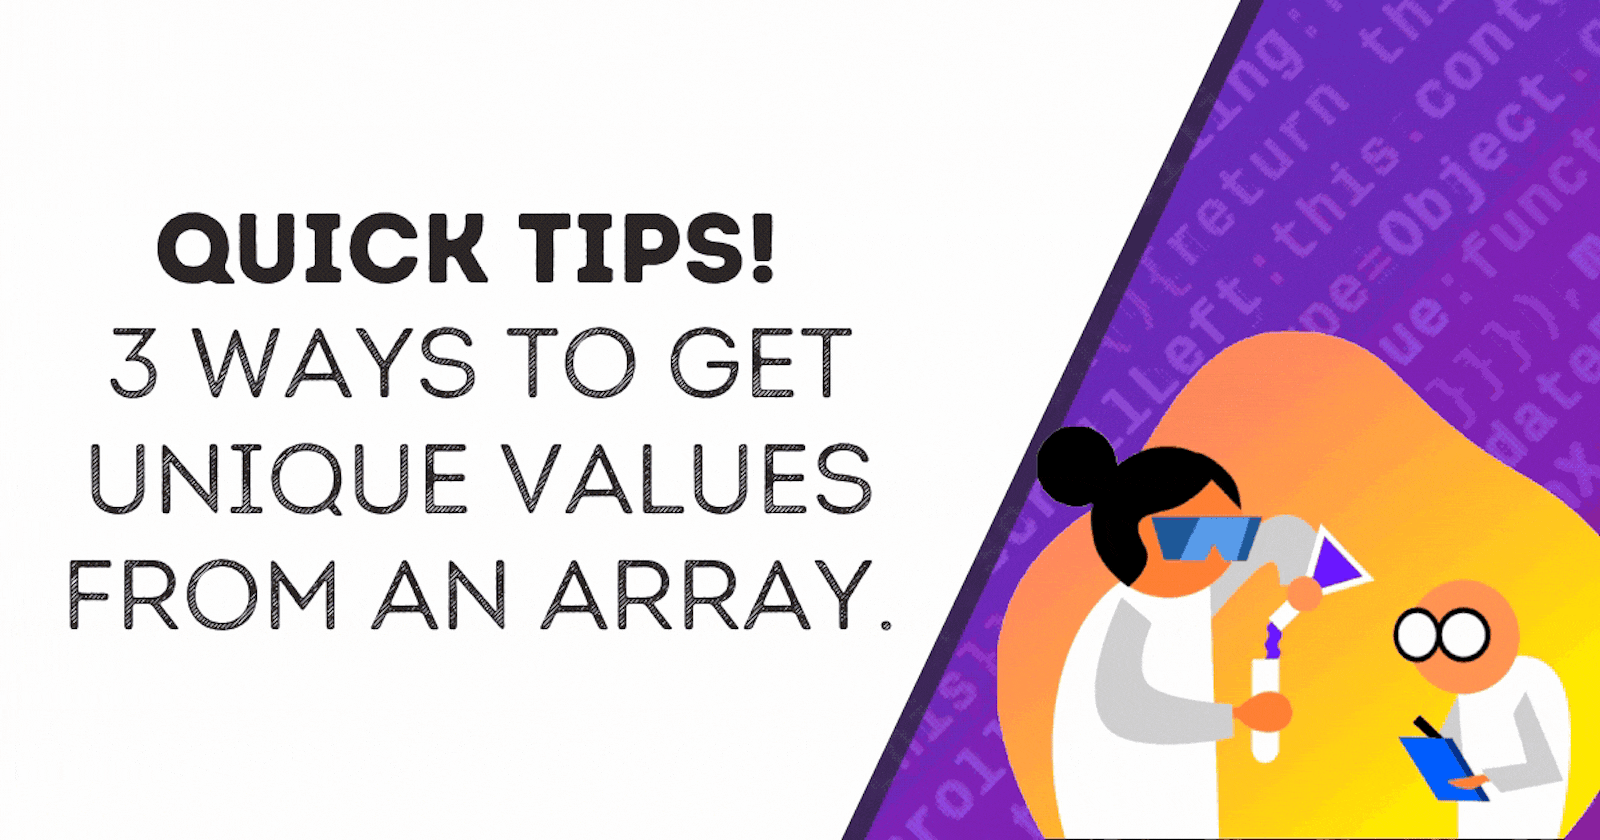 🚀 Quick tips! 3 ways to get unique values from an array.